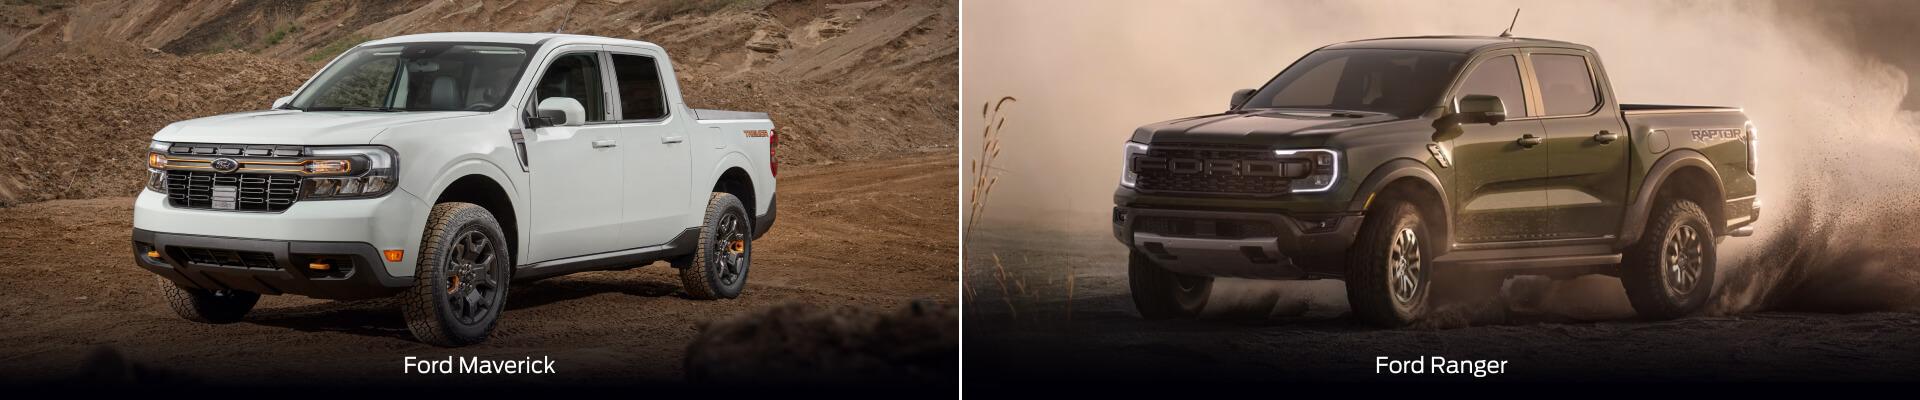 Ford Maverick vs Ranger: What's the Difference?